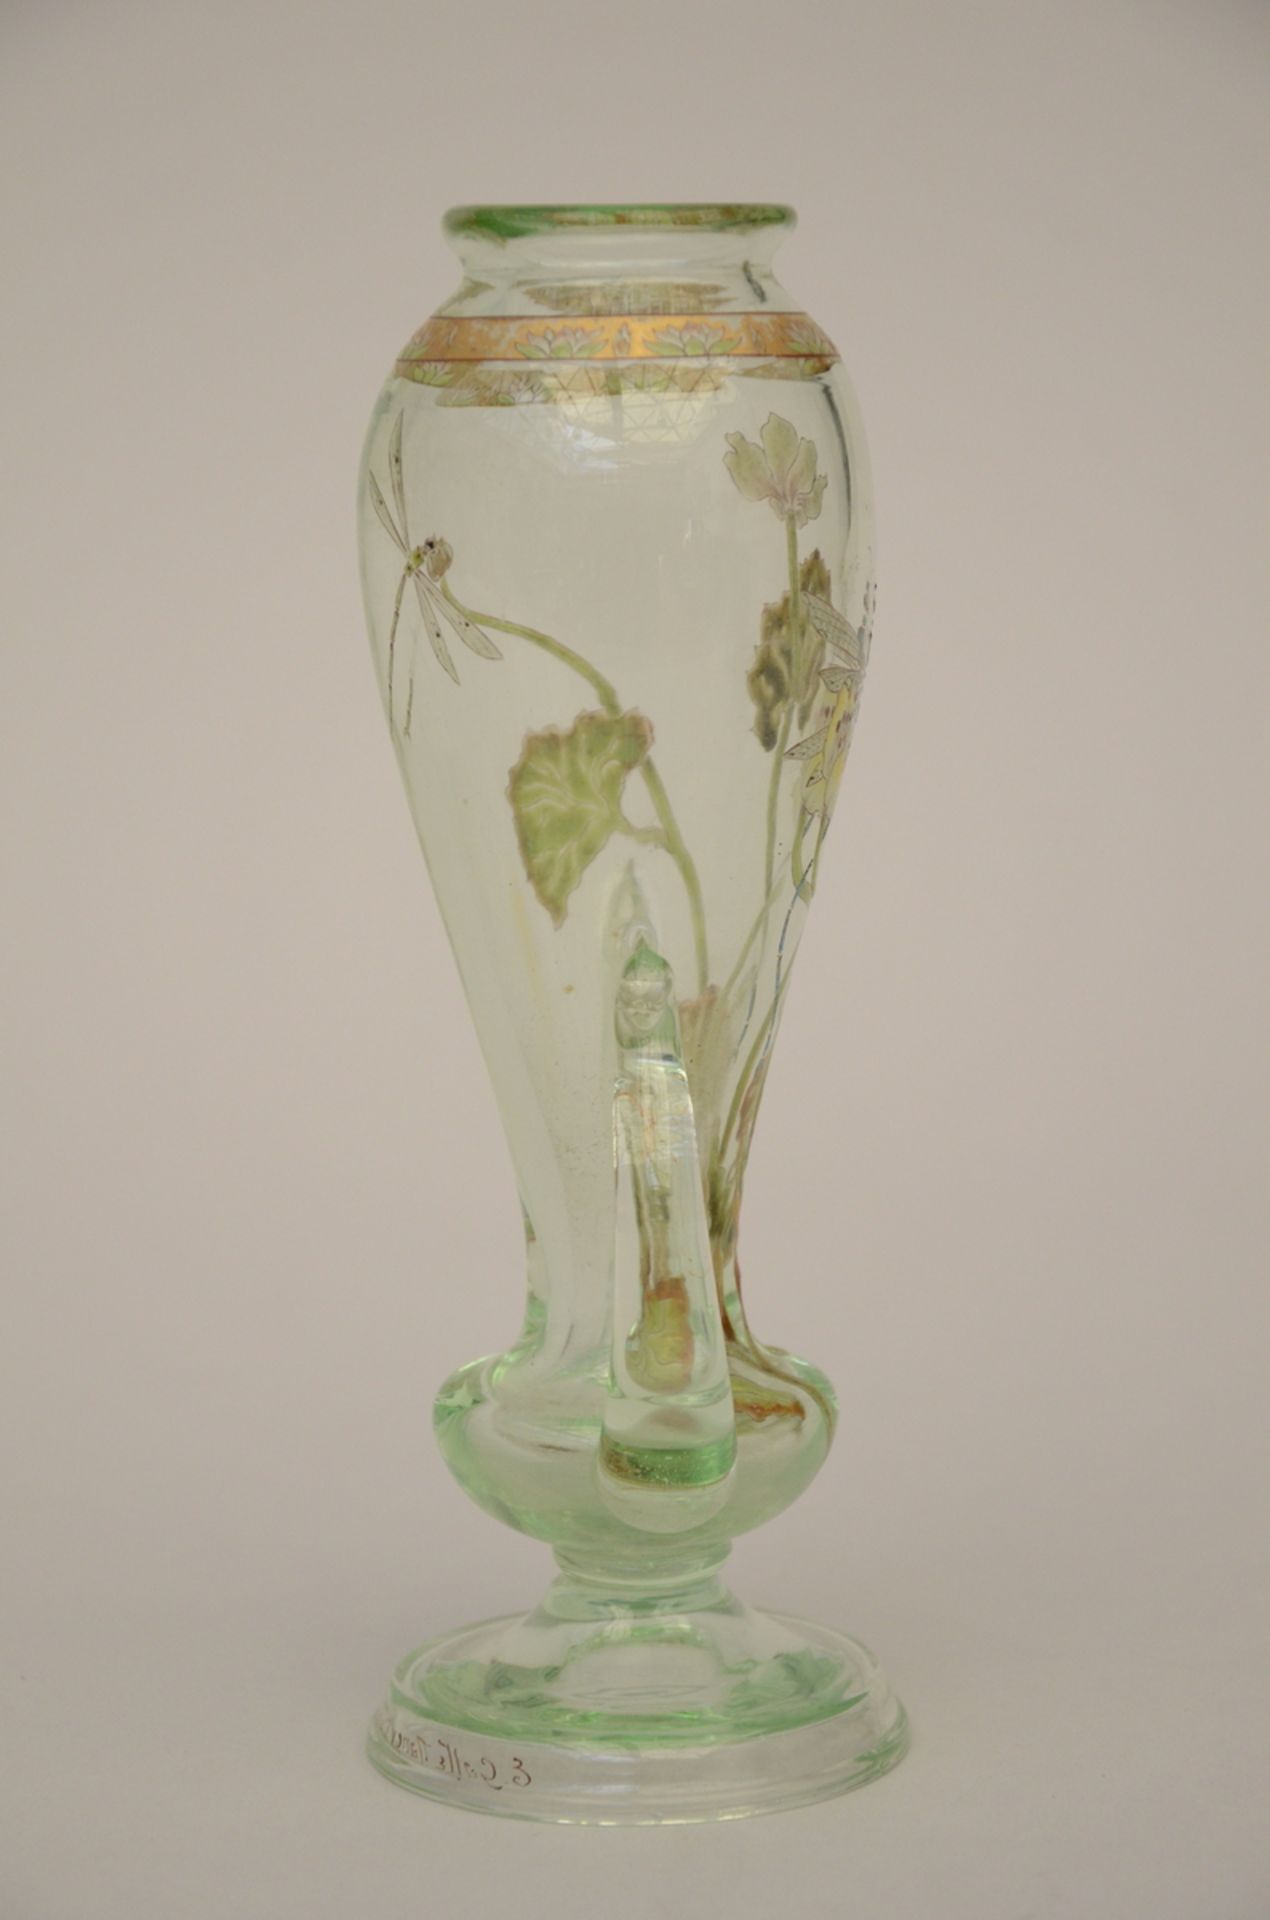 Gallé: Art Nouveau vase in enamelled glass 'insects and flowers' (H20.5cm) - Image 2 of 5